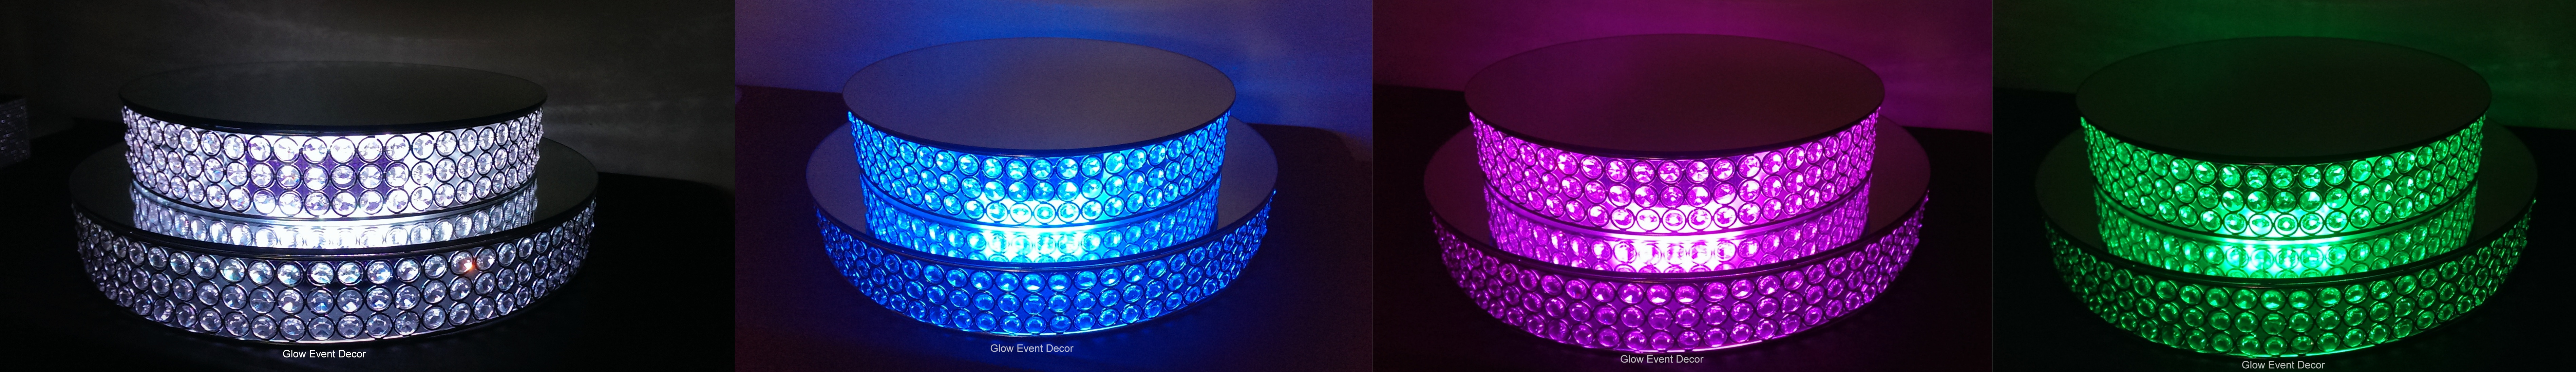 two tier LED crystal cake stand with LED light up base, for hire glow event decor adelaide